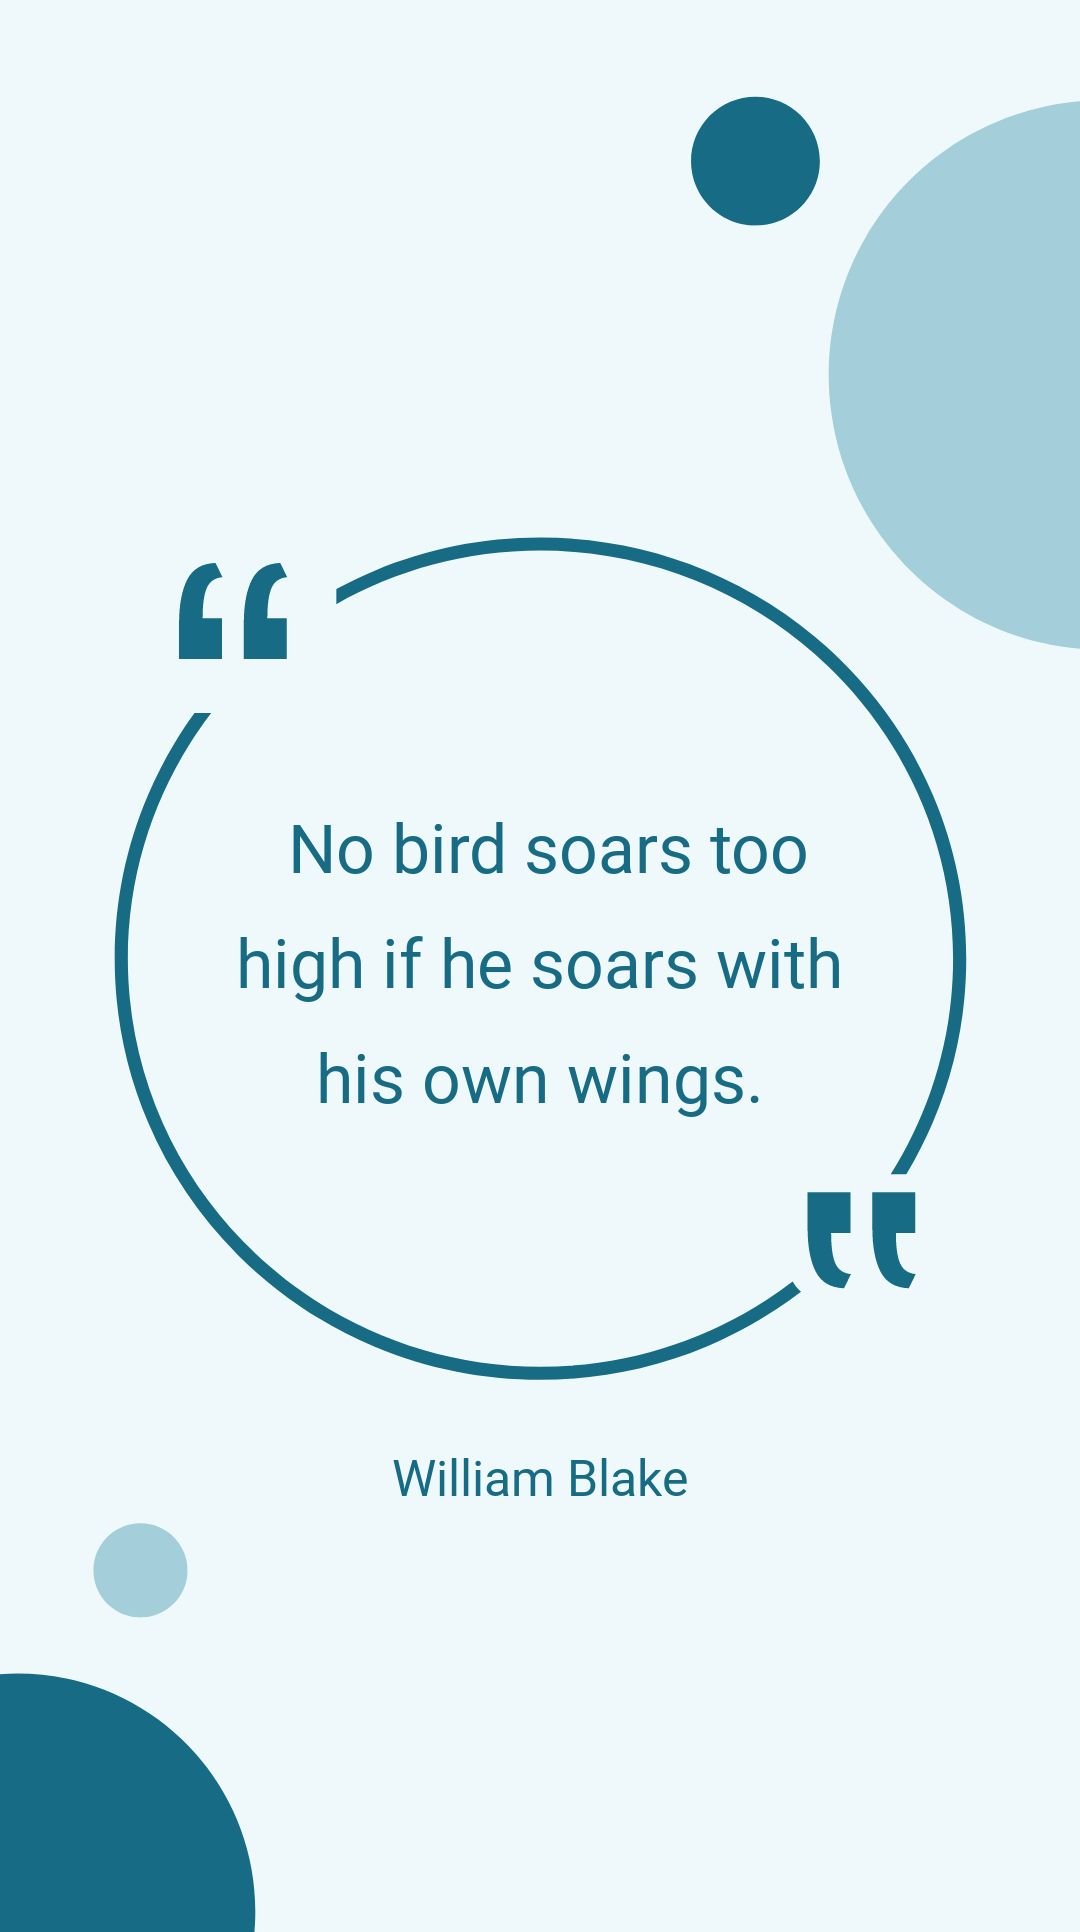 William Blake - No bird soars too high if he soars with his own wings.